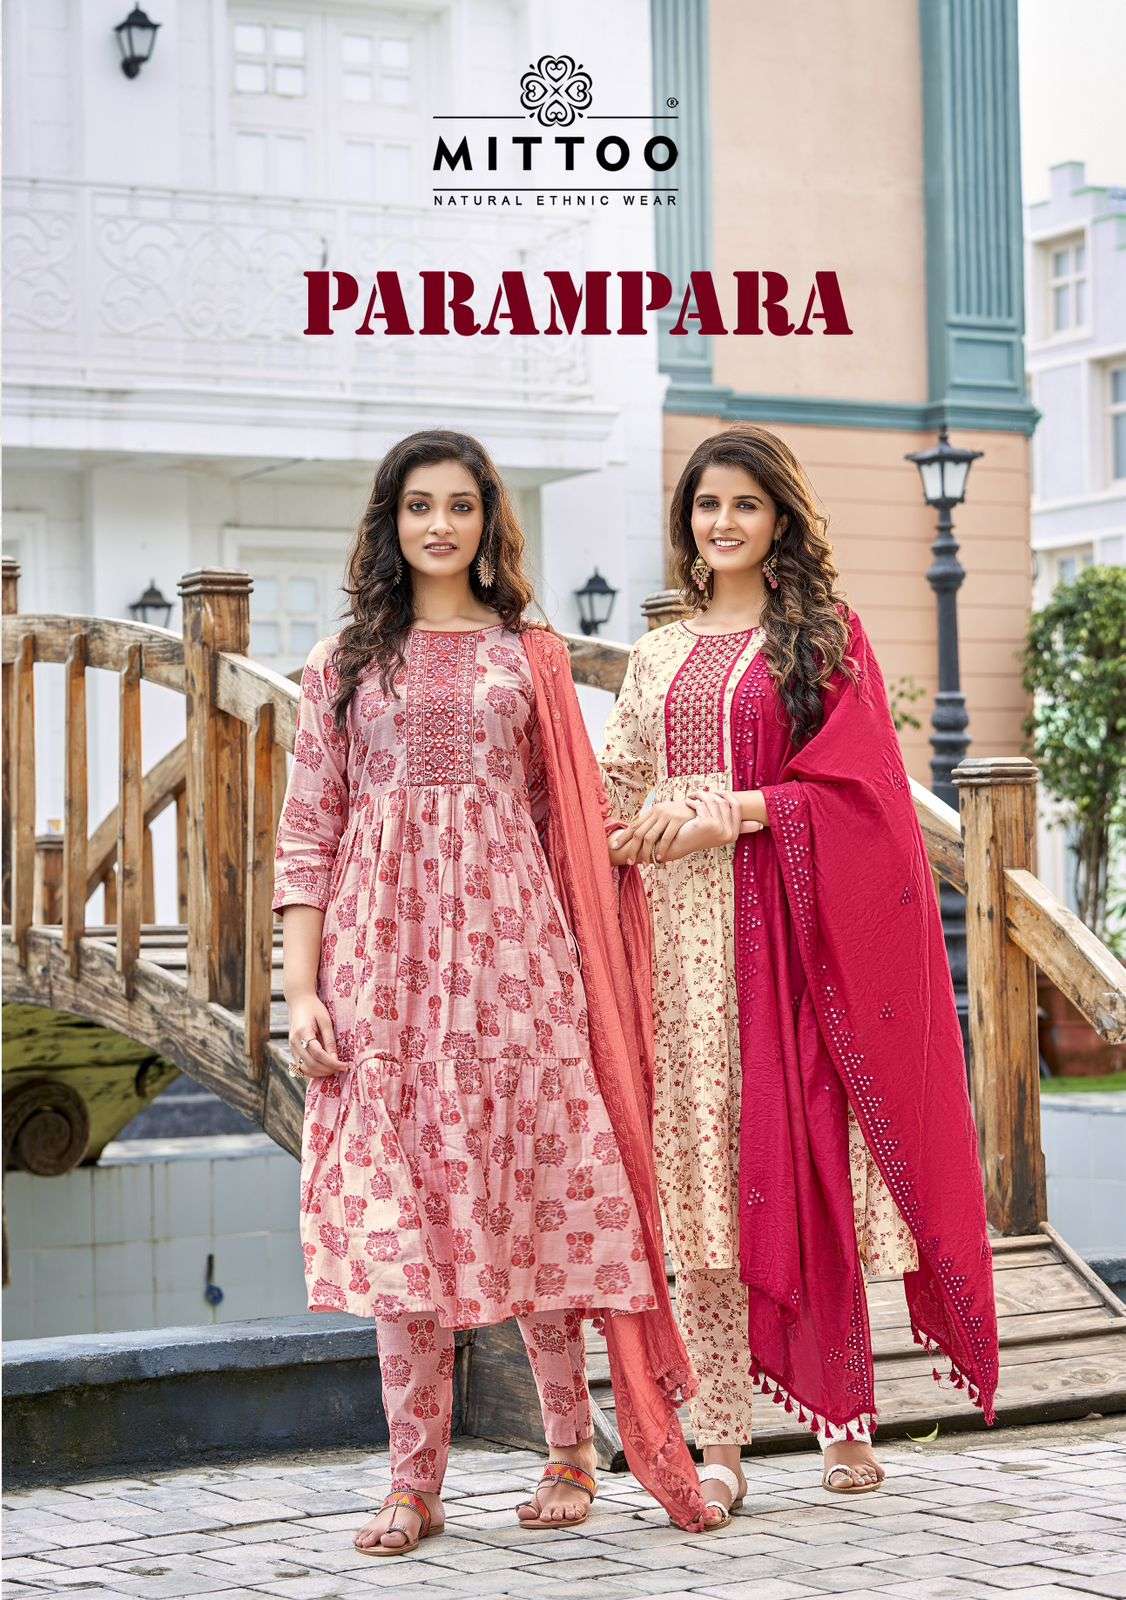 Mittoo Parampara Exclusive Chanderi Readymade Suits New Colletion